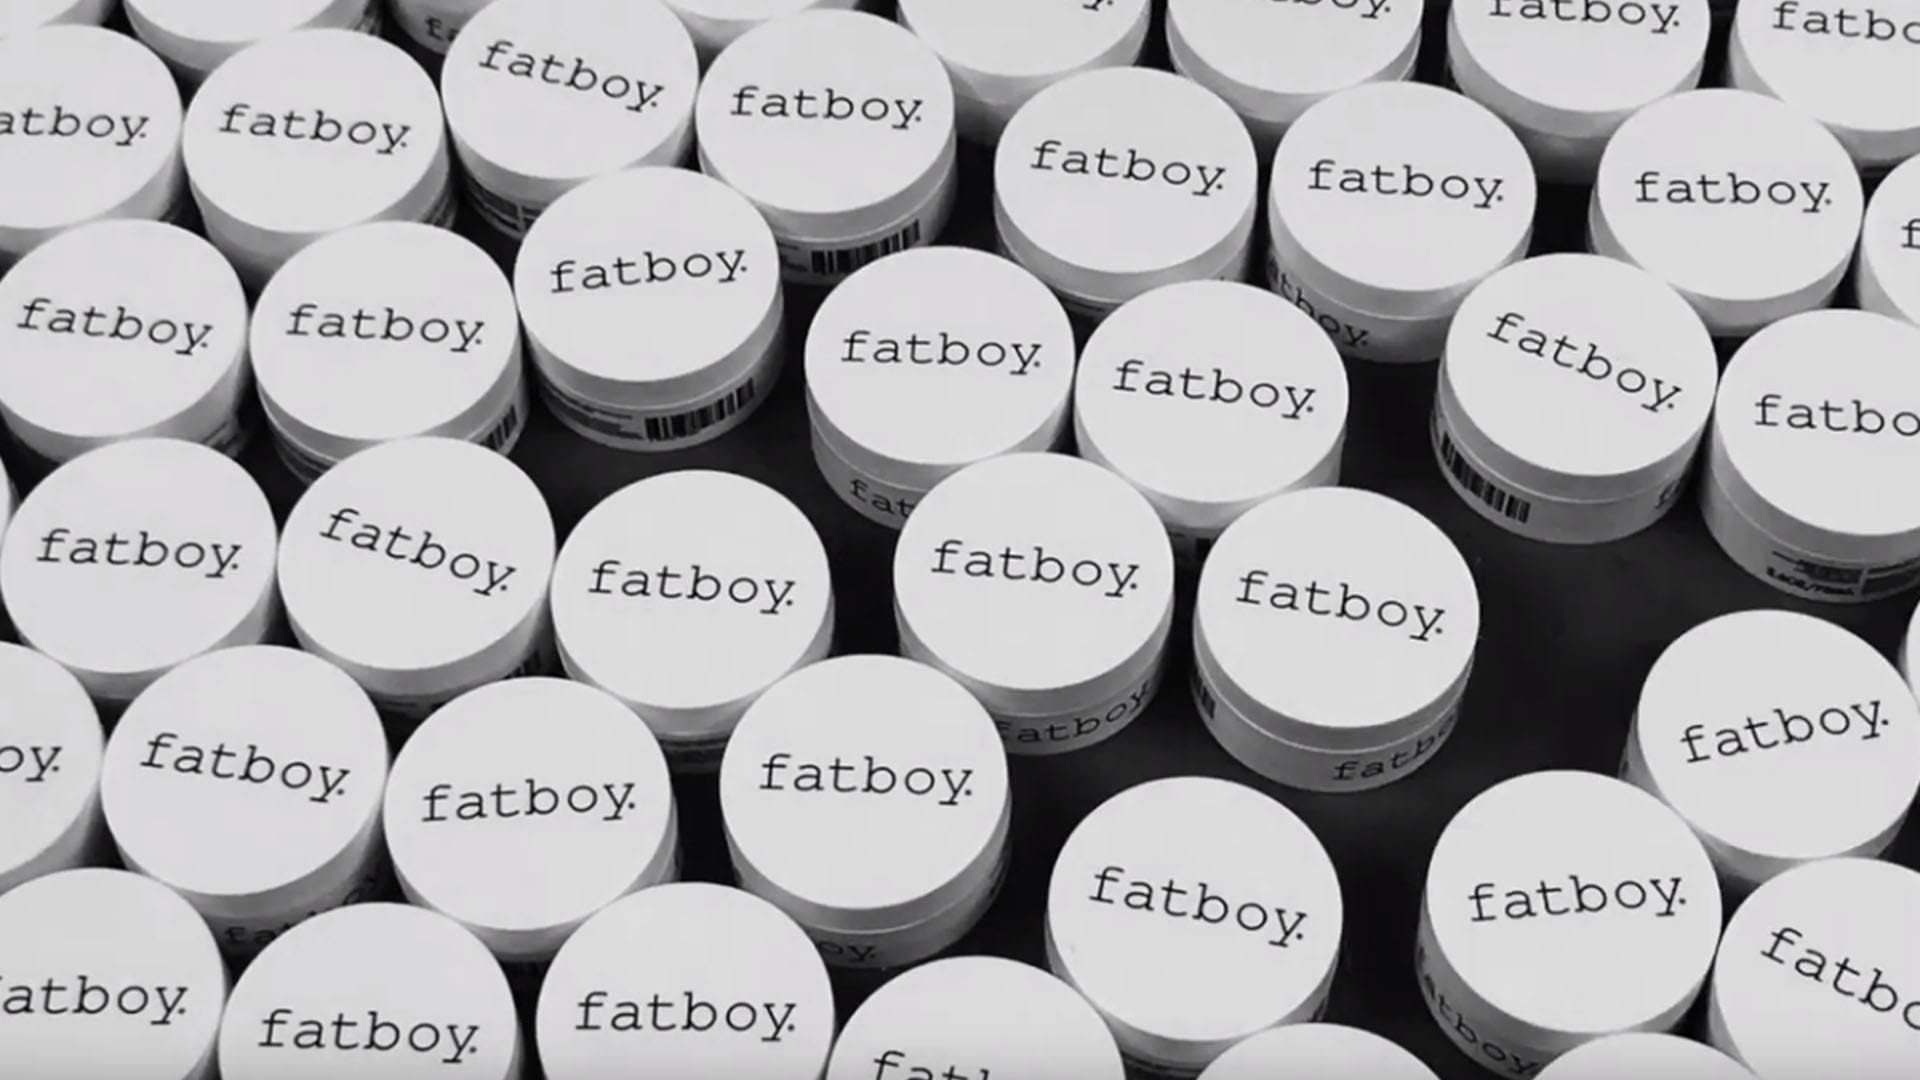 Mallory-Cook-Hair-Stylist-Products-Fatboy-Products-2